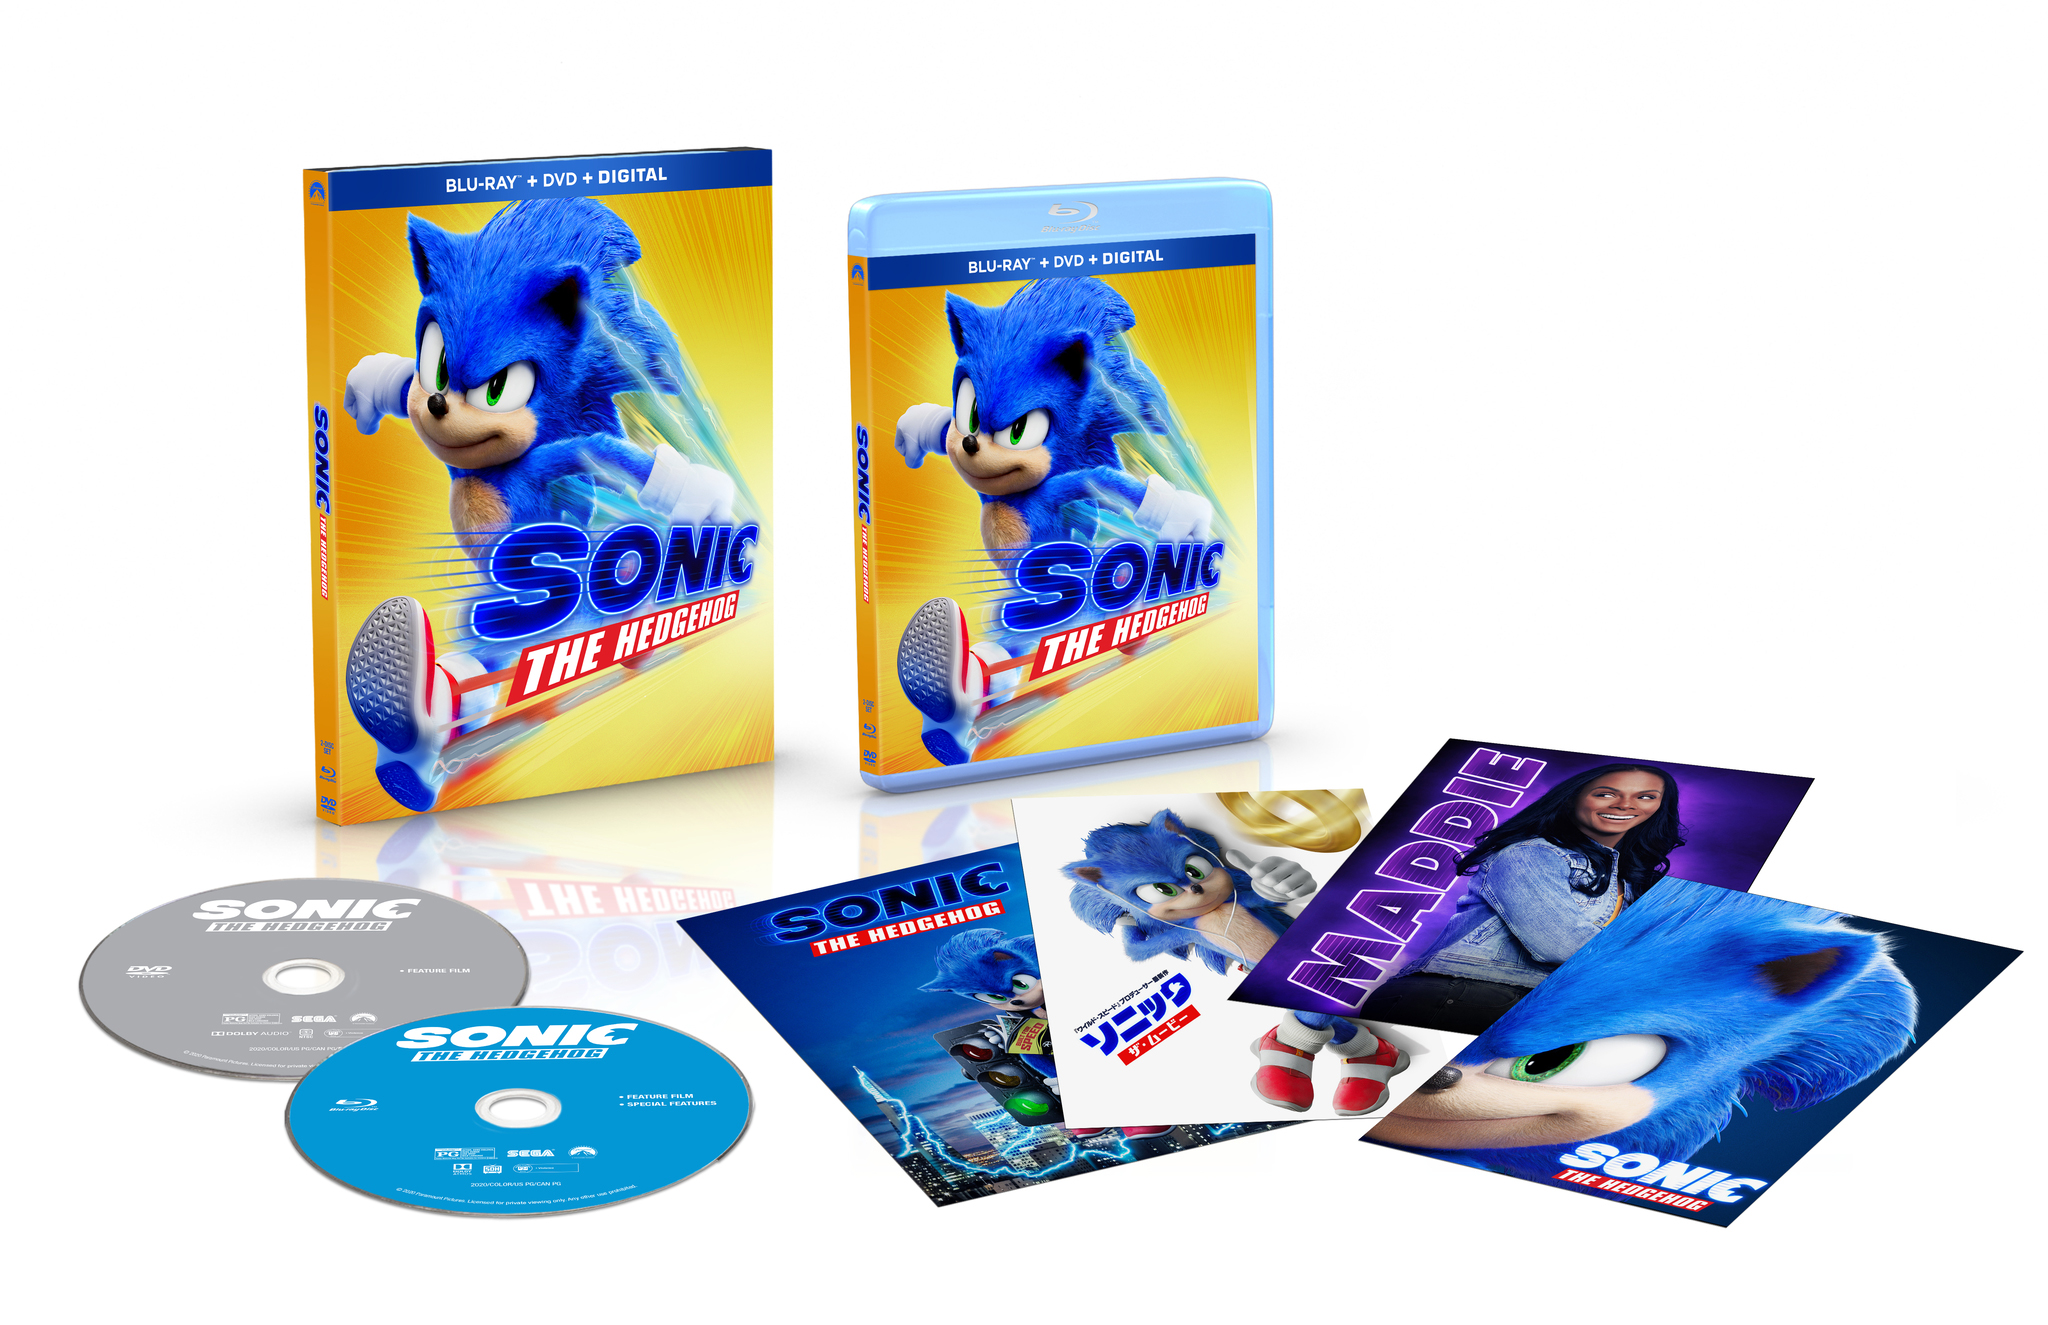 Sonic the Hedgehog: 2-Movie Collection (Blu-ray) for sale online